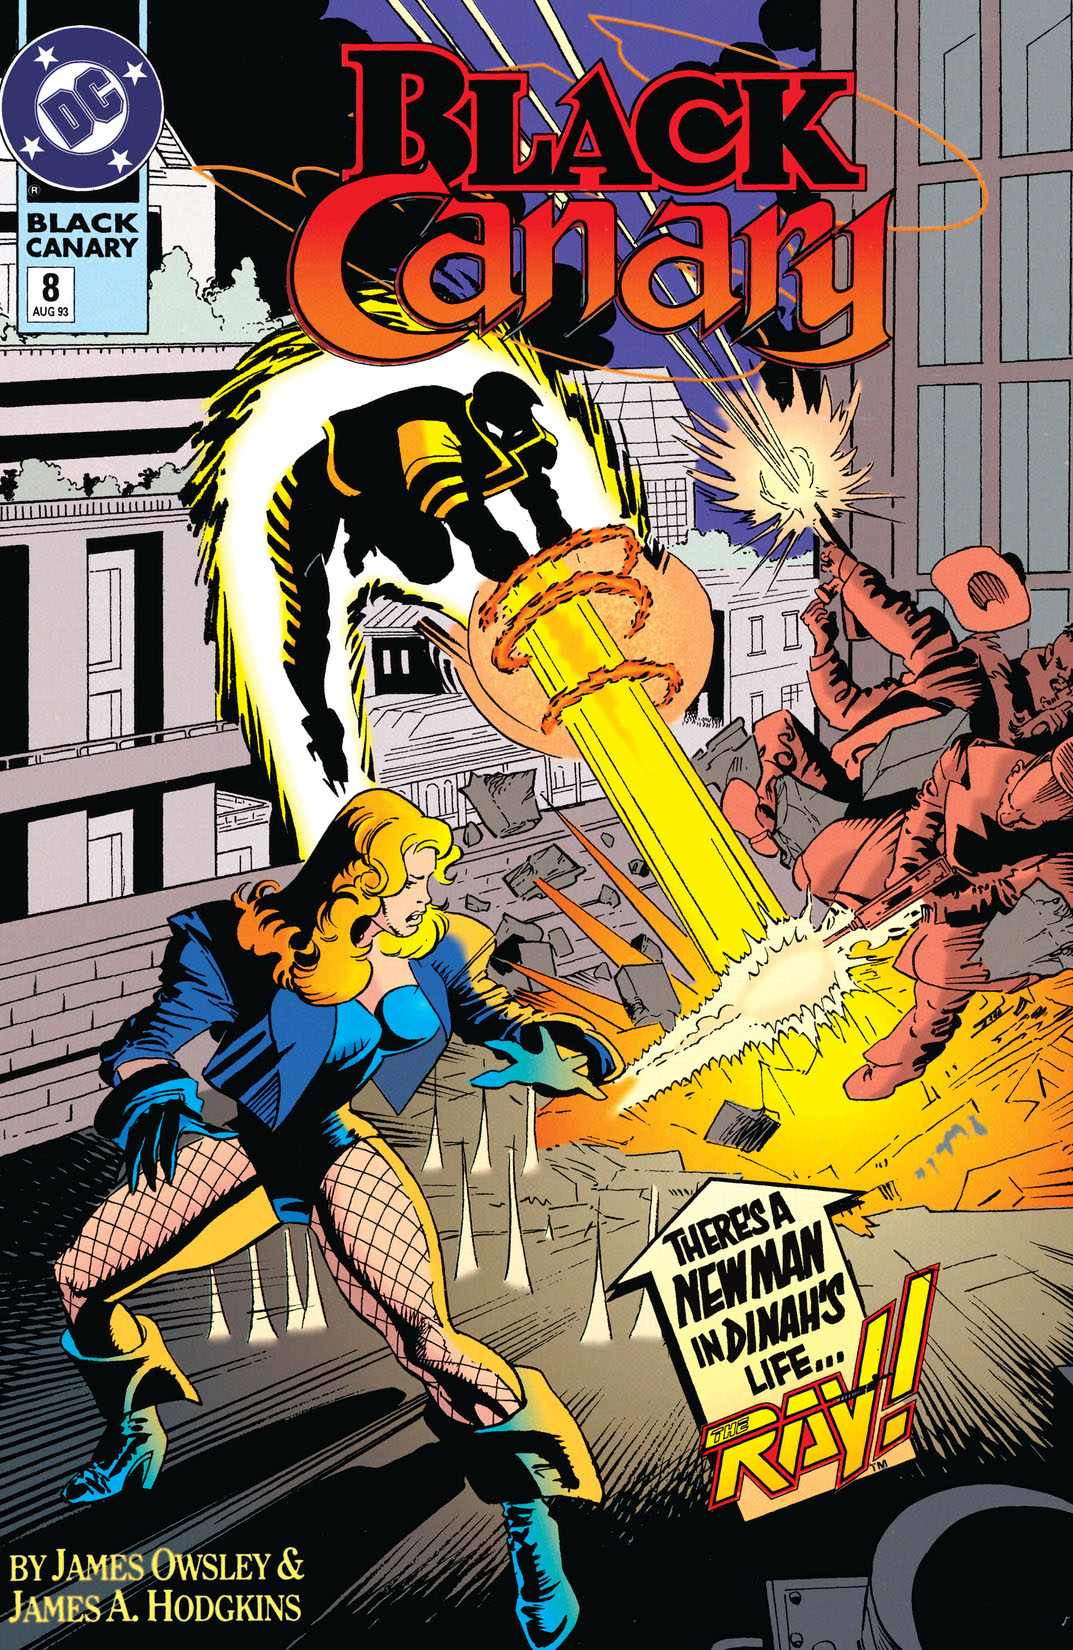 Black Canary (1992-) #8 preview images